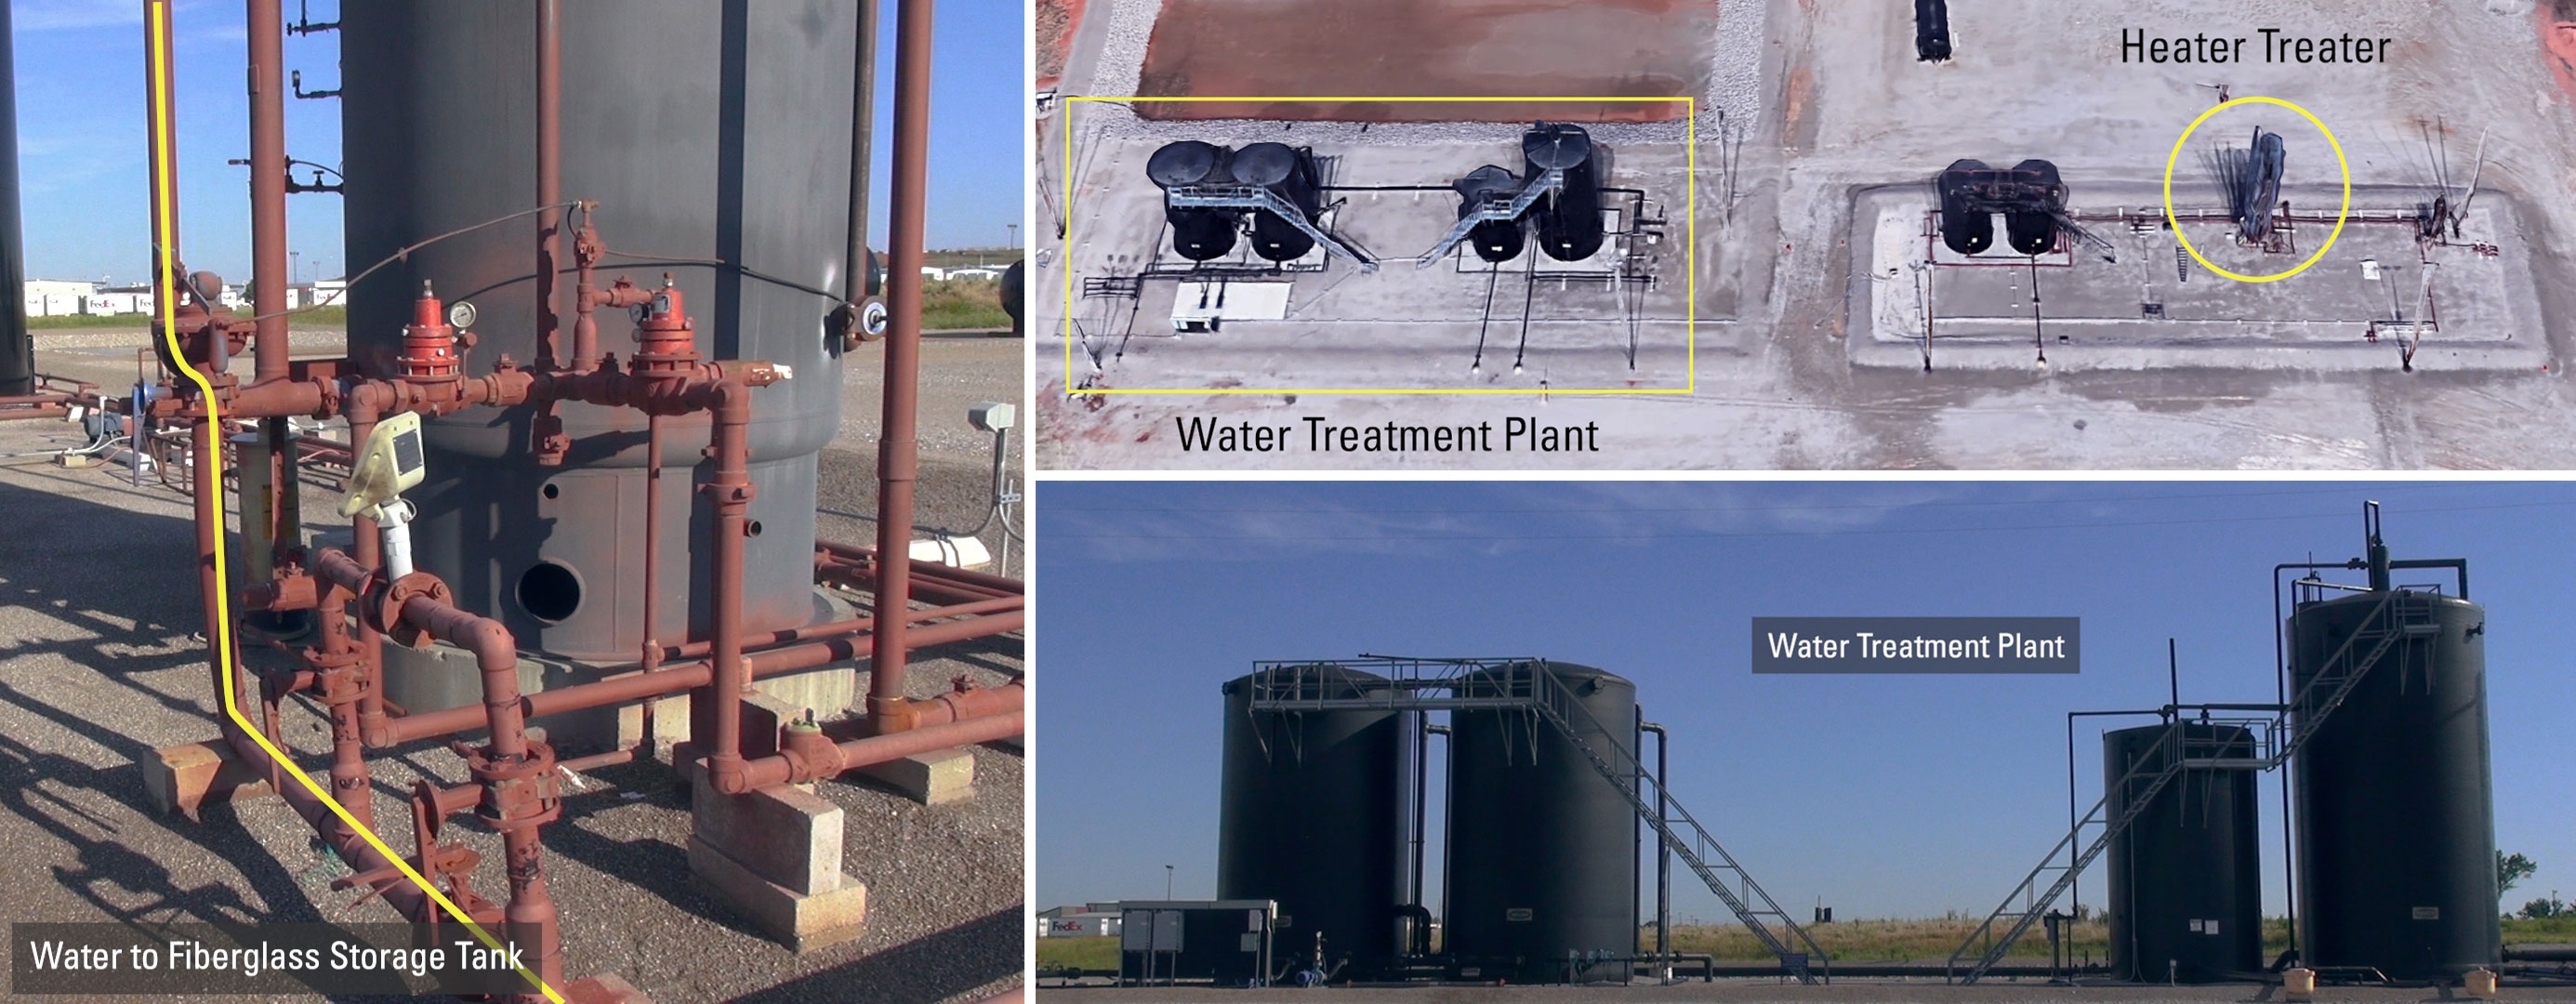 Water Treatment Plant after Heater Treater